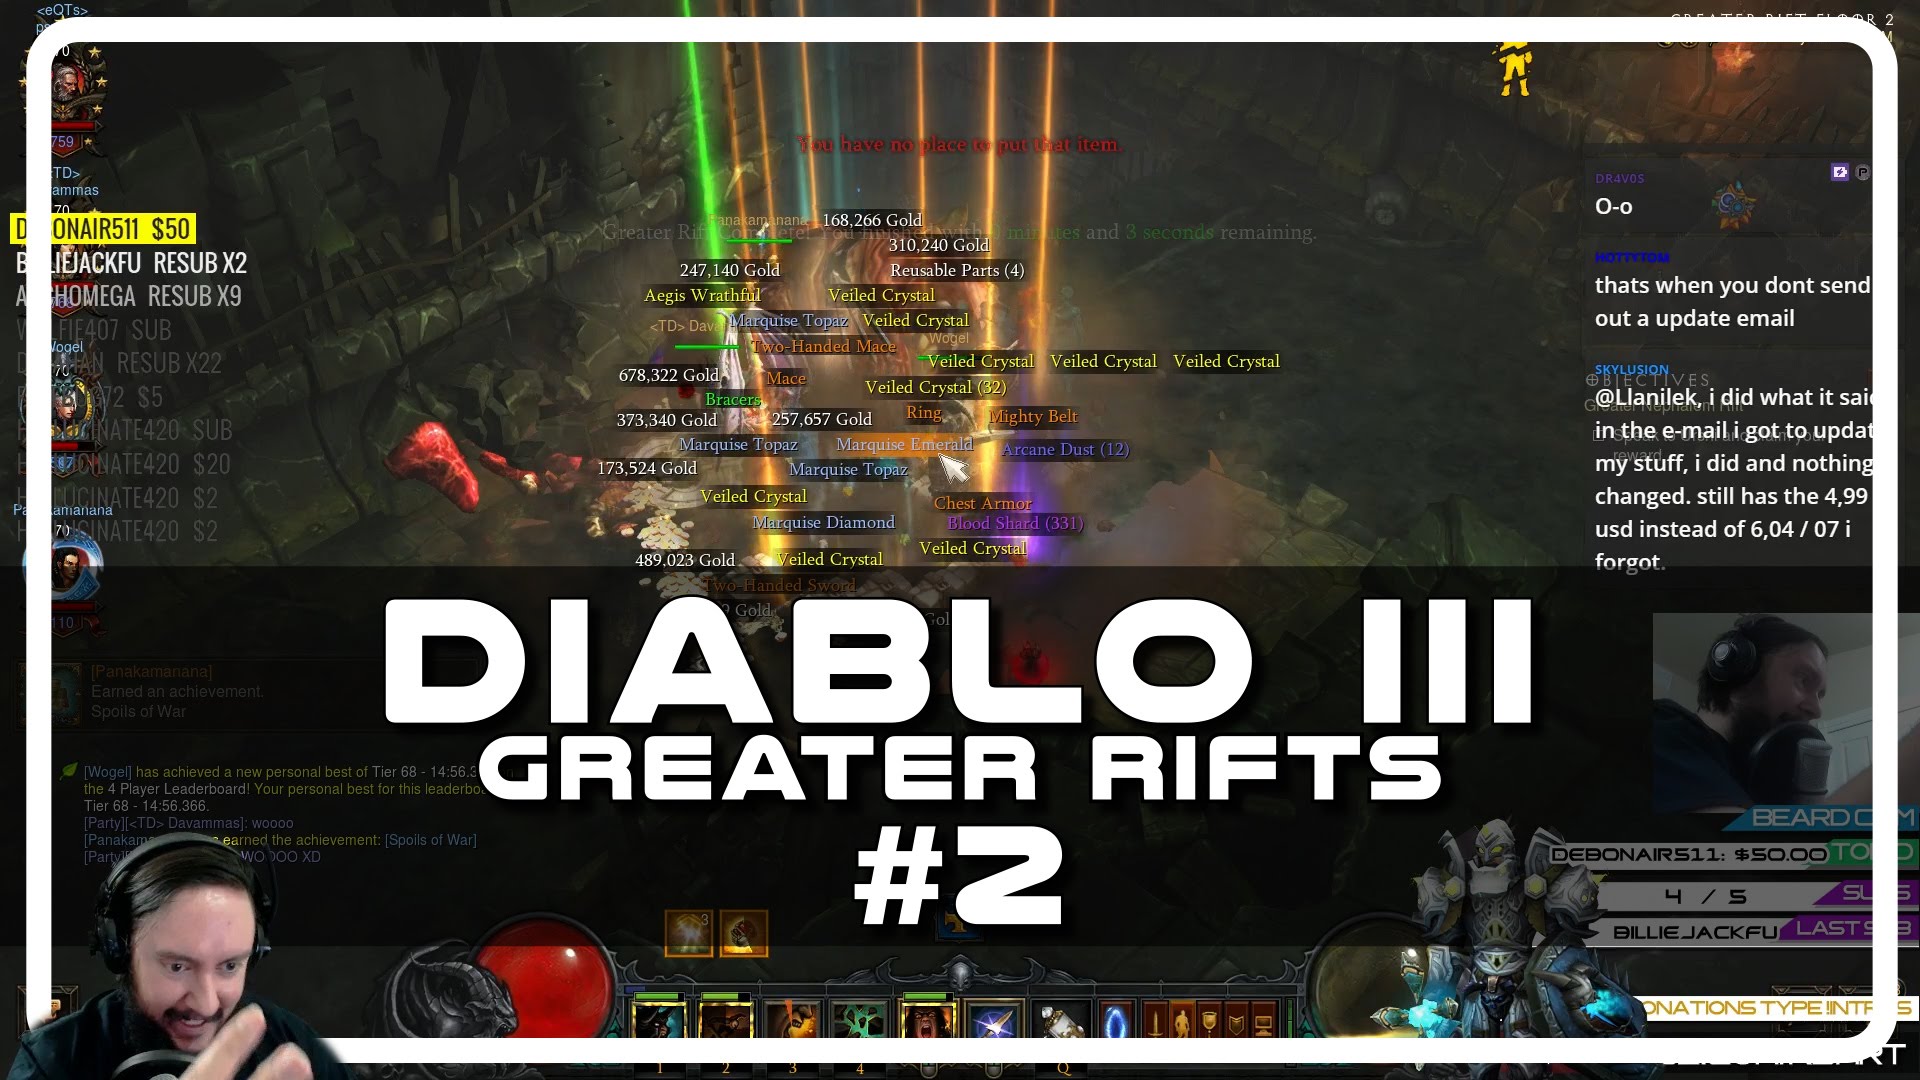 Diablo III Greater Rifts with Psynaps #02